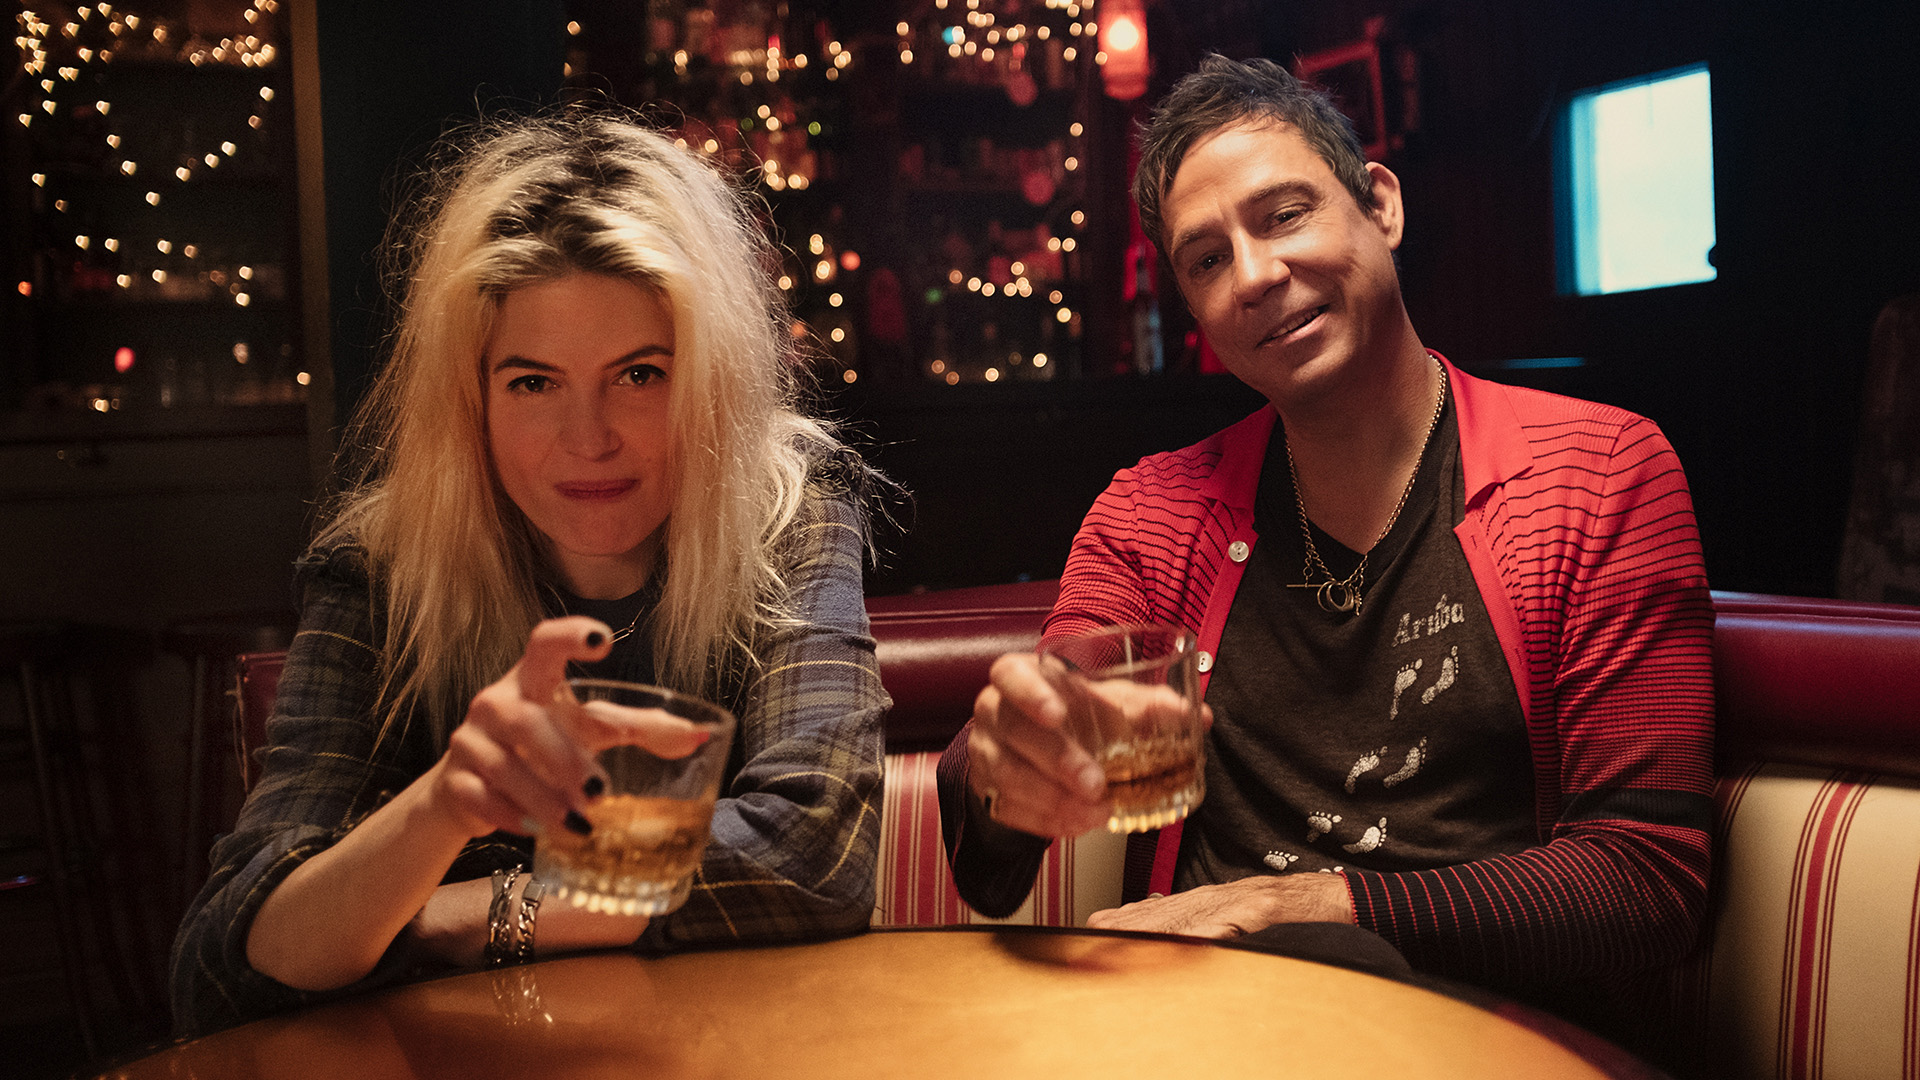 The Kills, made up of Alison Mosshart and Jamie Hince, have joined Seagram’s 7 Crown Whiskey to celebrate dive bars across the country with the re-release of two remastered songs -- Night Train and Blue Moon -- on National Dive Bar Day this year. Photo by Clayton Cubitt via DIAGEO.